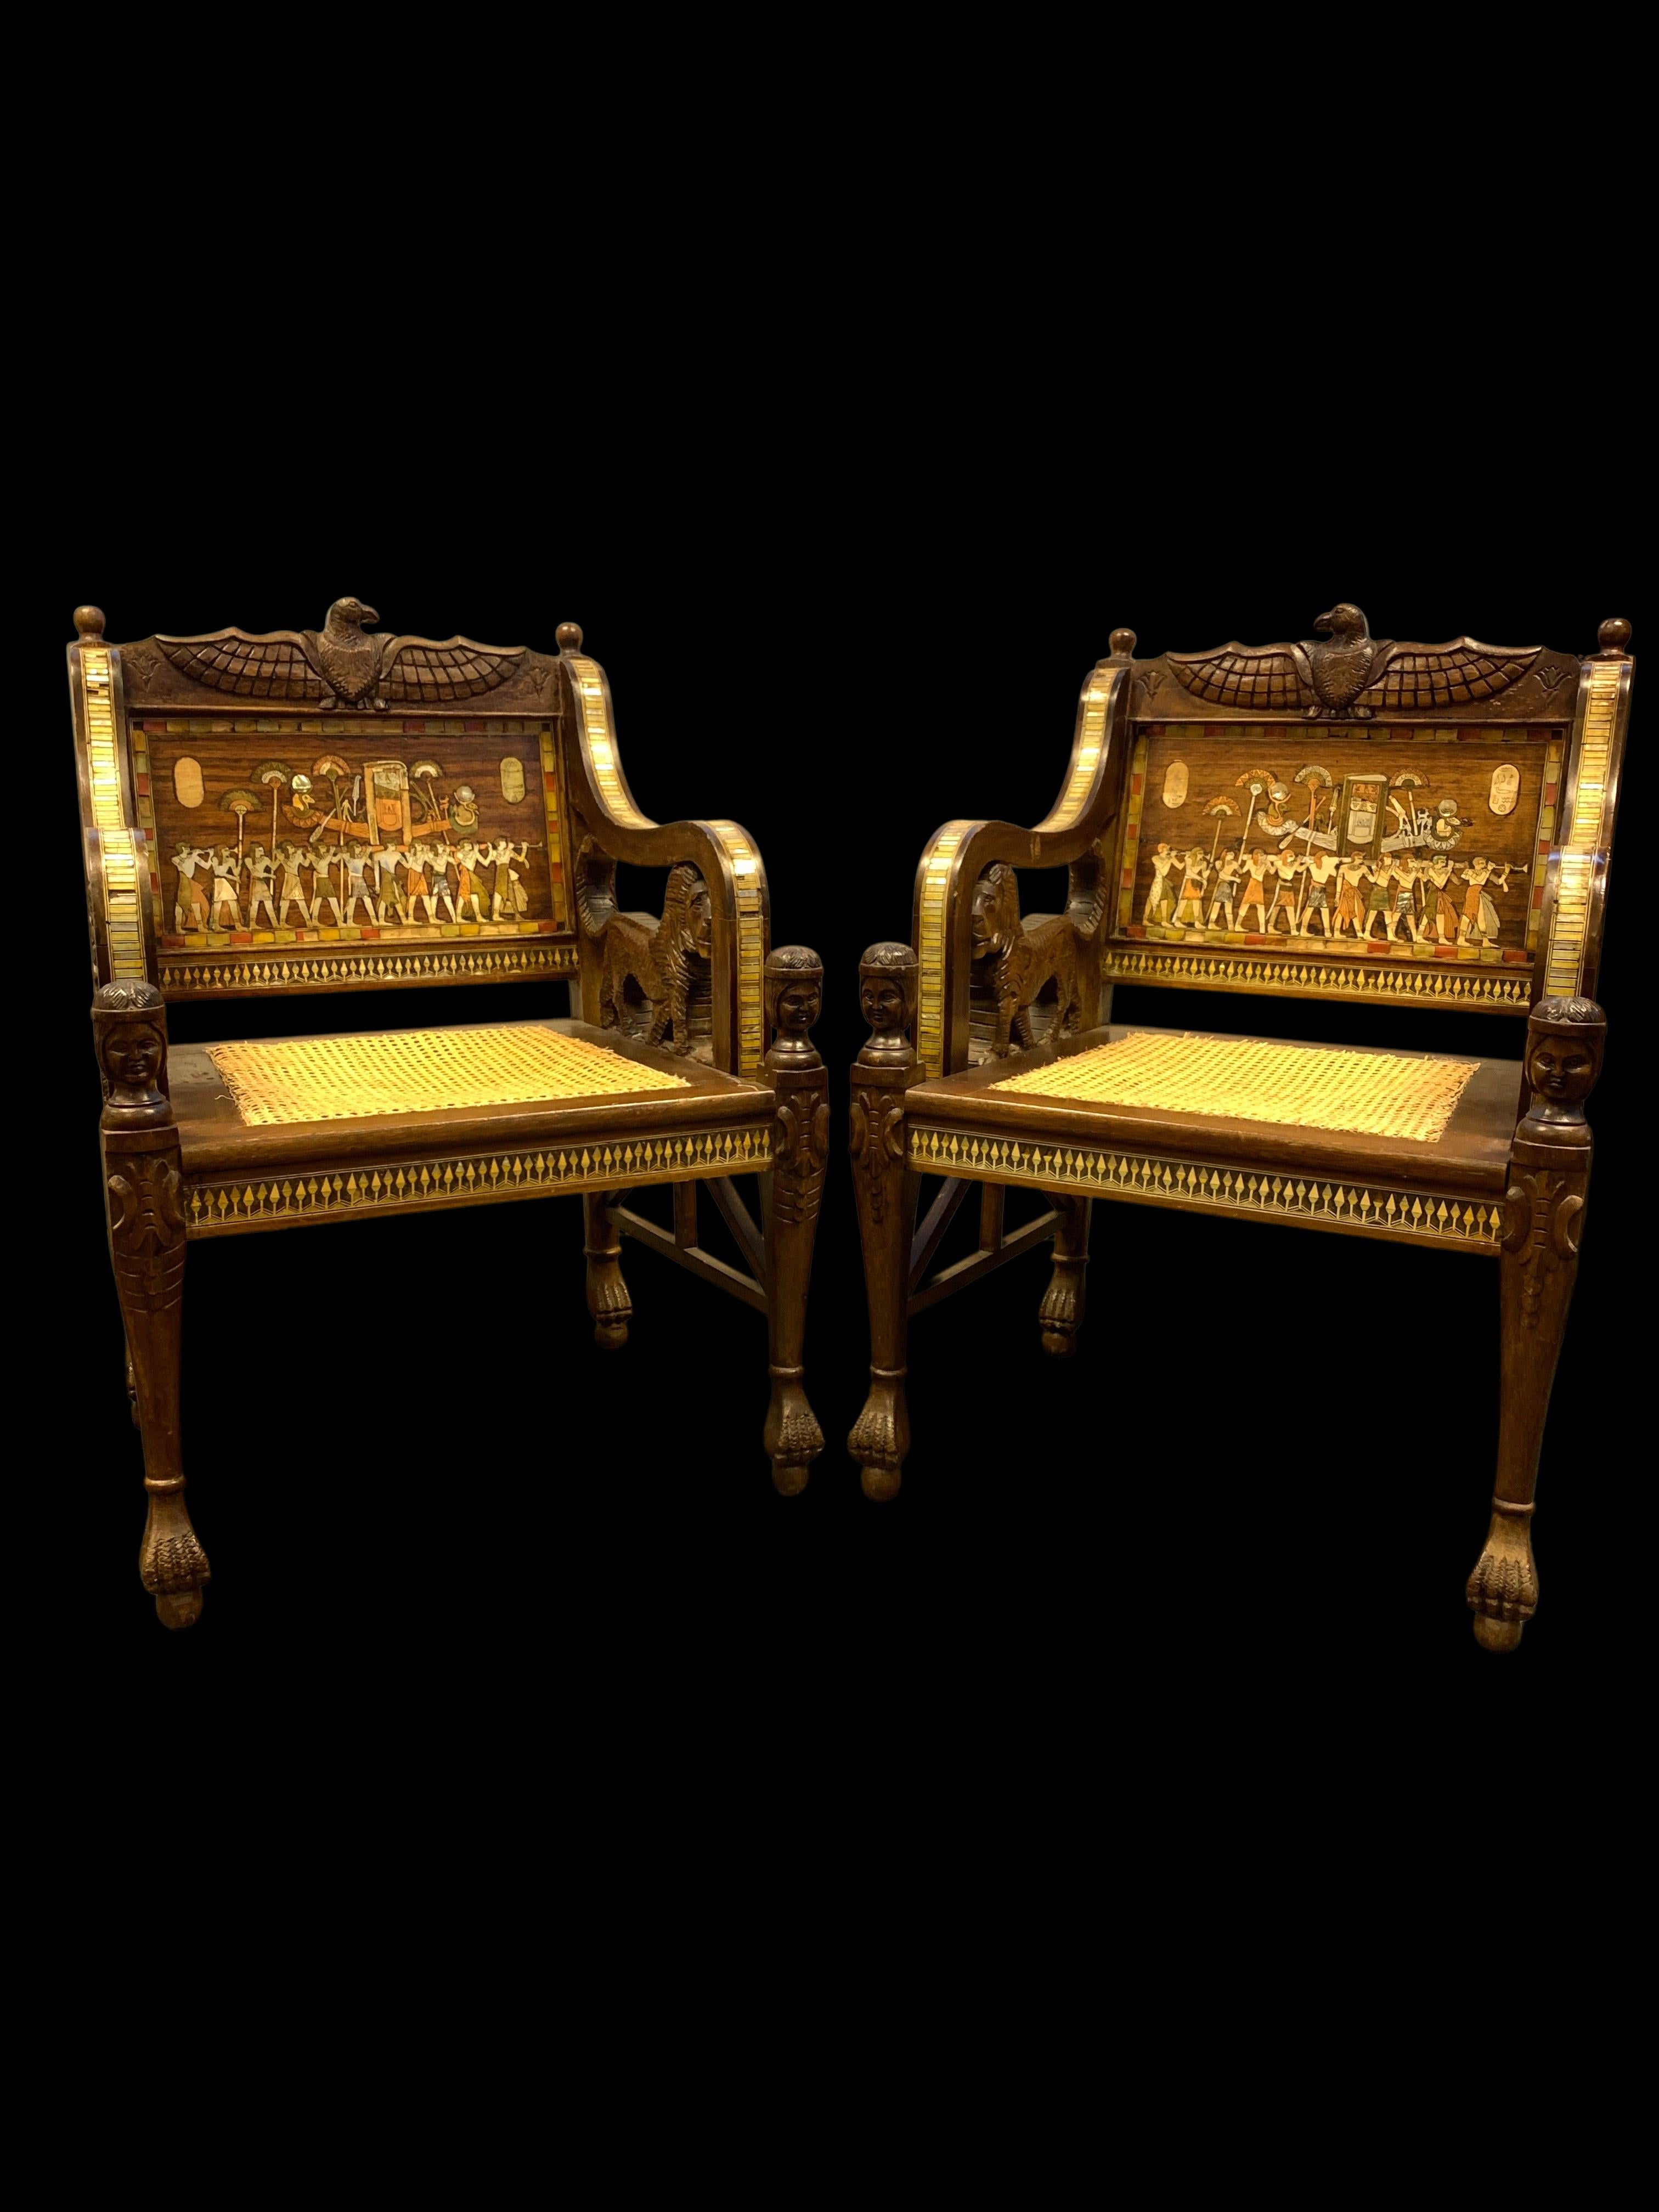 Exquisite and rare set of three Egyptian revival furniture, the set consist of two chairs and a sofa, all three pieces heavily decorated with Egyptian motifs from the Pharaonic civilisation. 

Dimensions: Chairs: H: 92cm, W: 66cm, D: 58cm.
 Sofa: